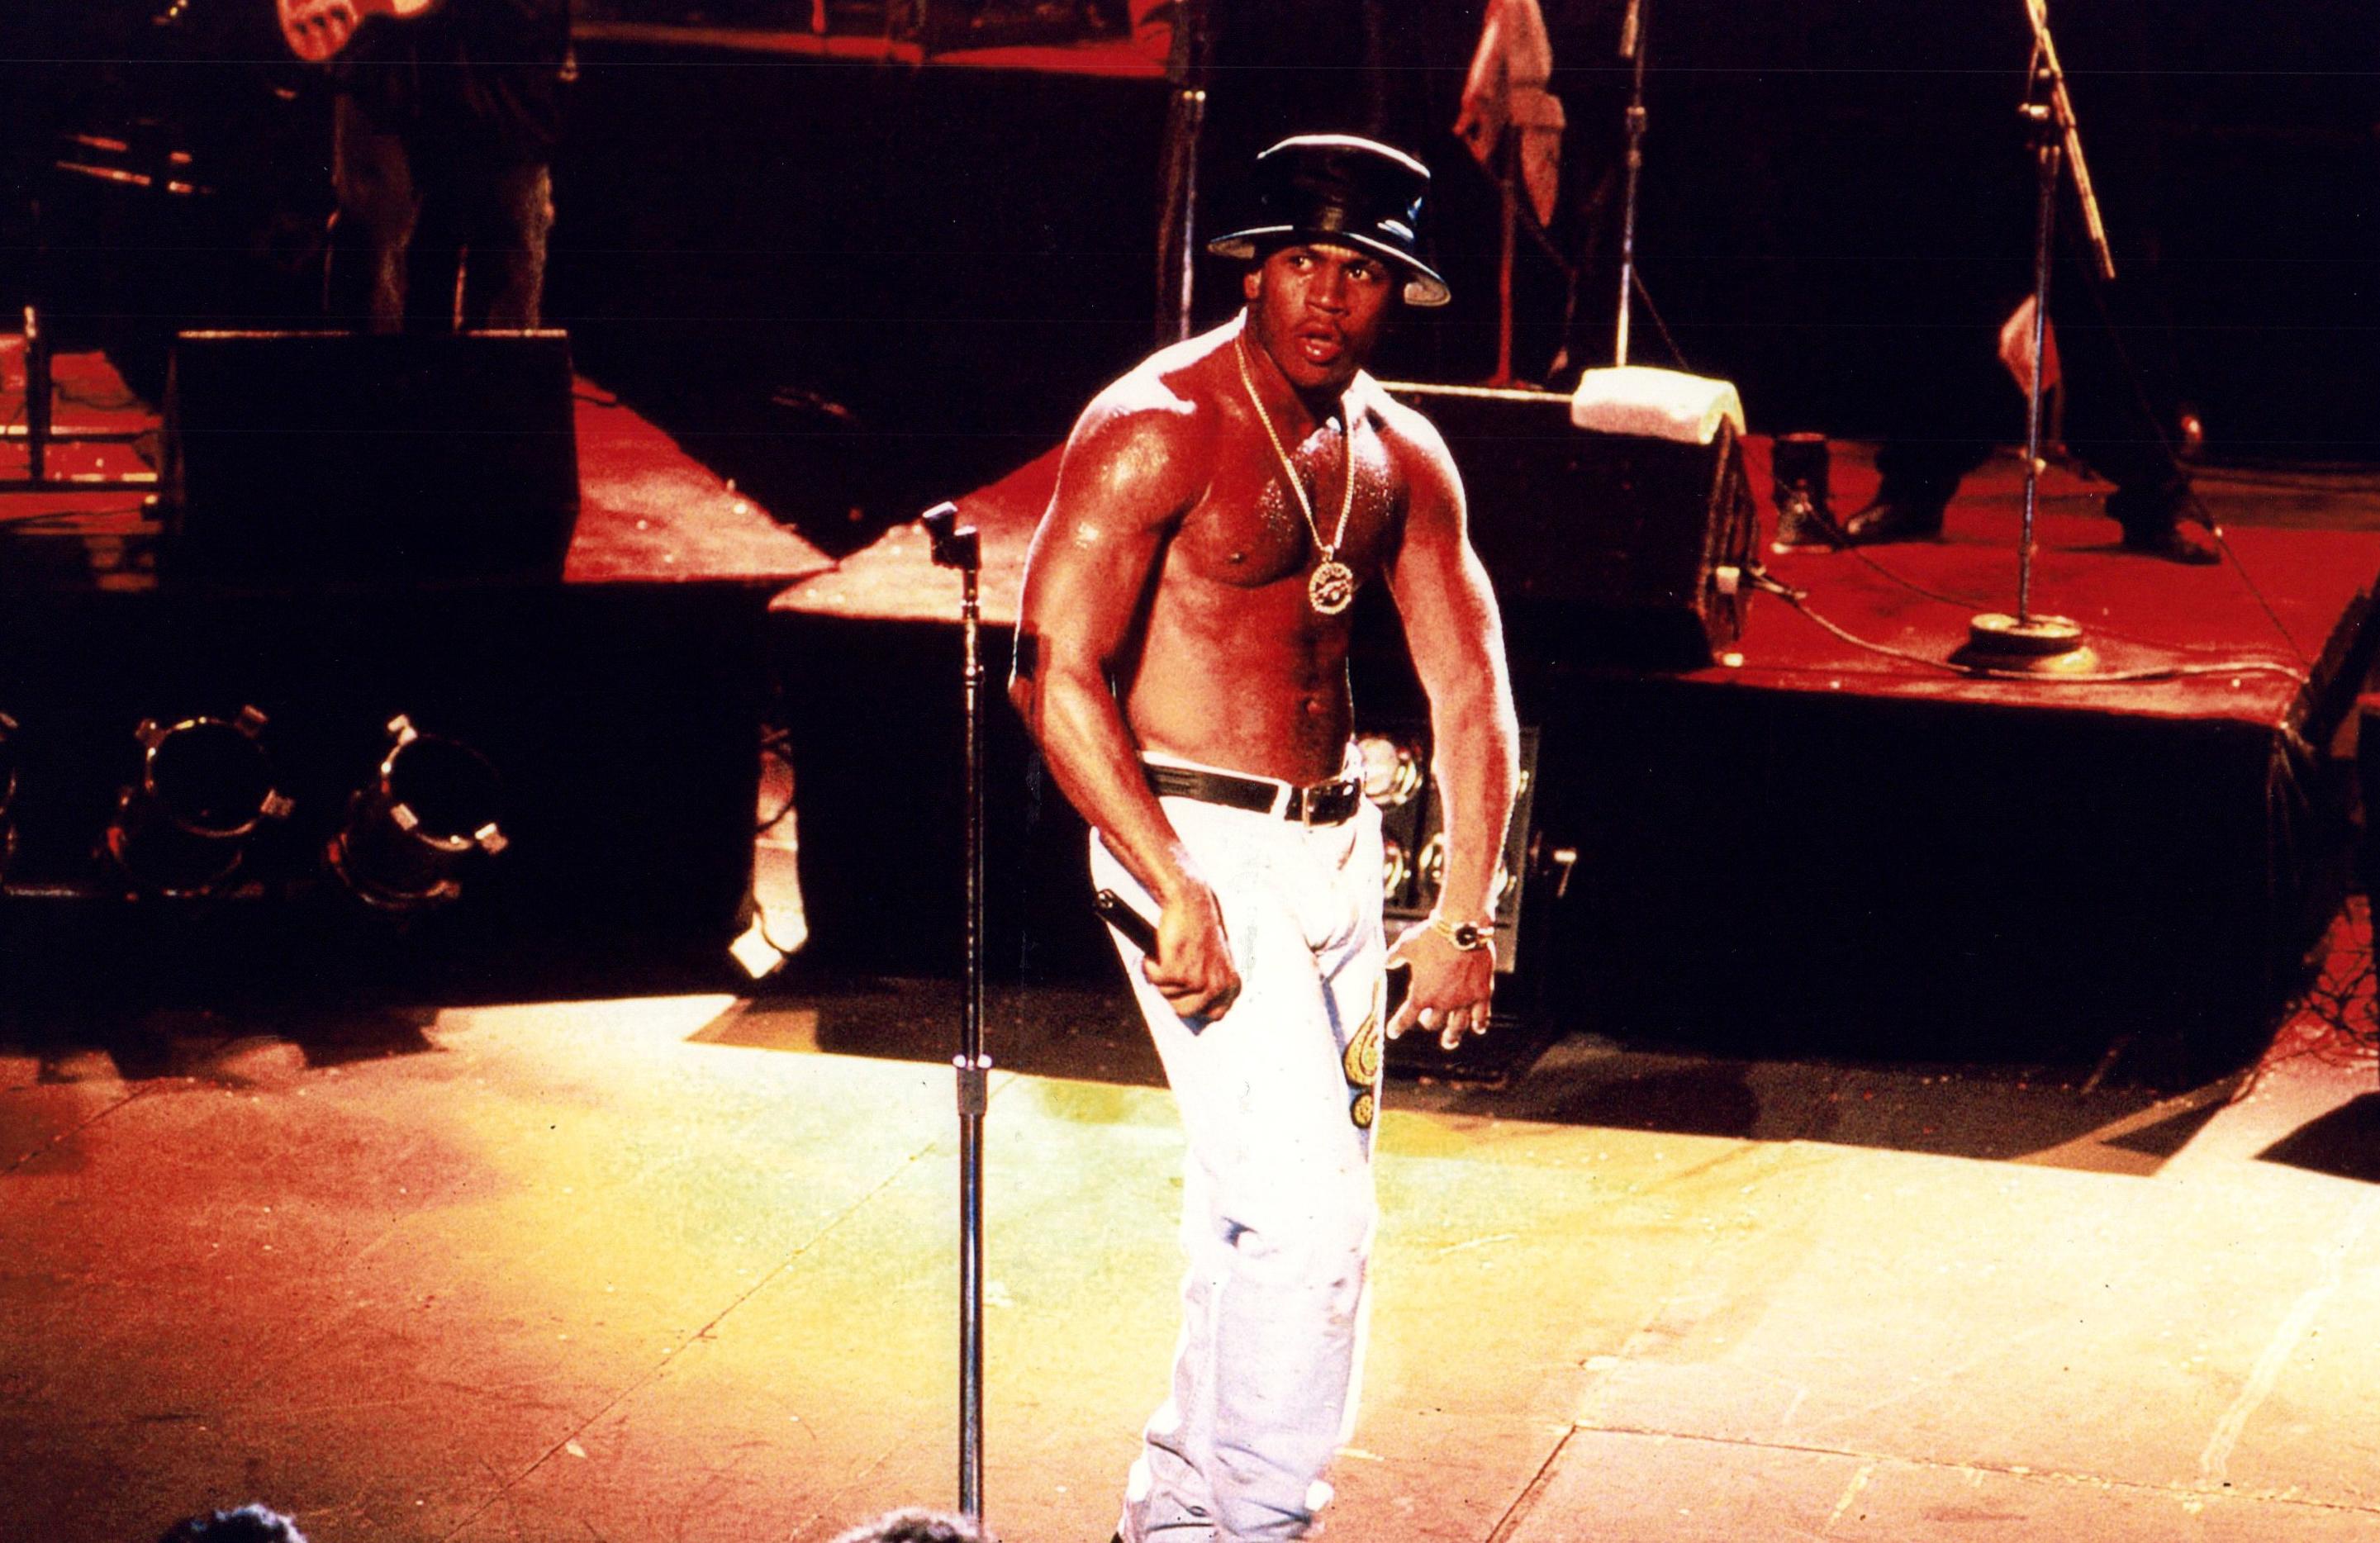 Frank Forcino Portrait Photograph - LL Cool J Shirtless on Stage Vintage Original Photograph